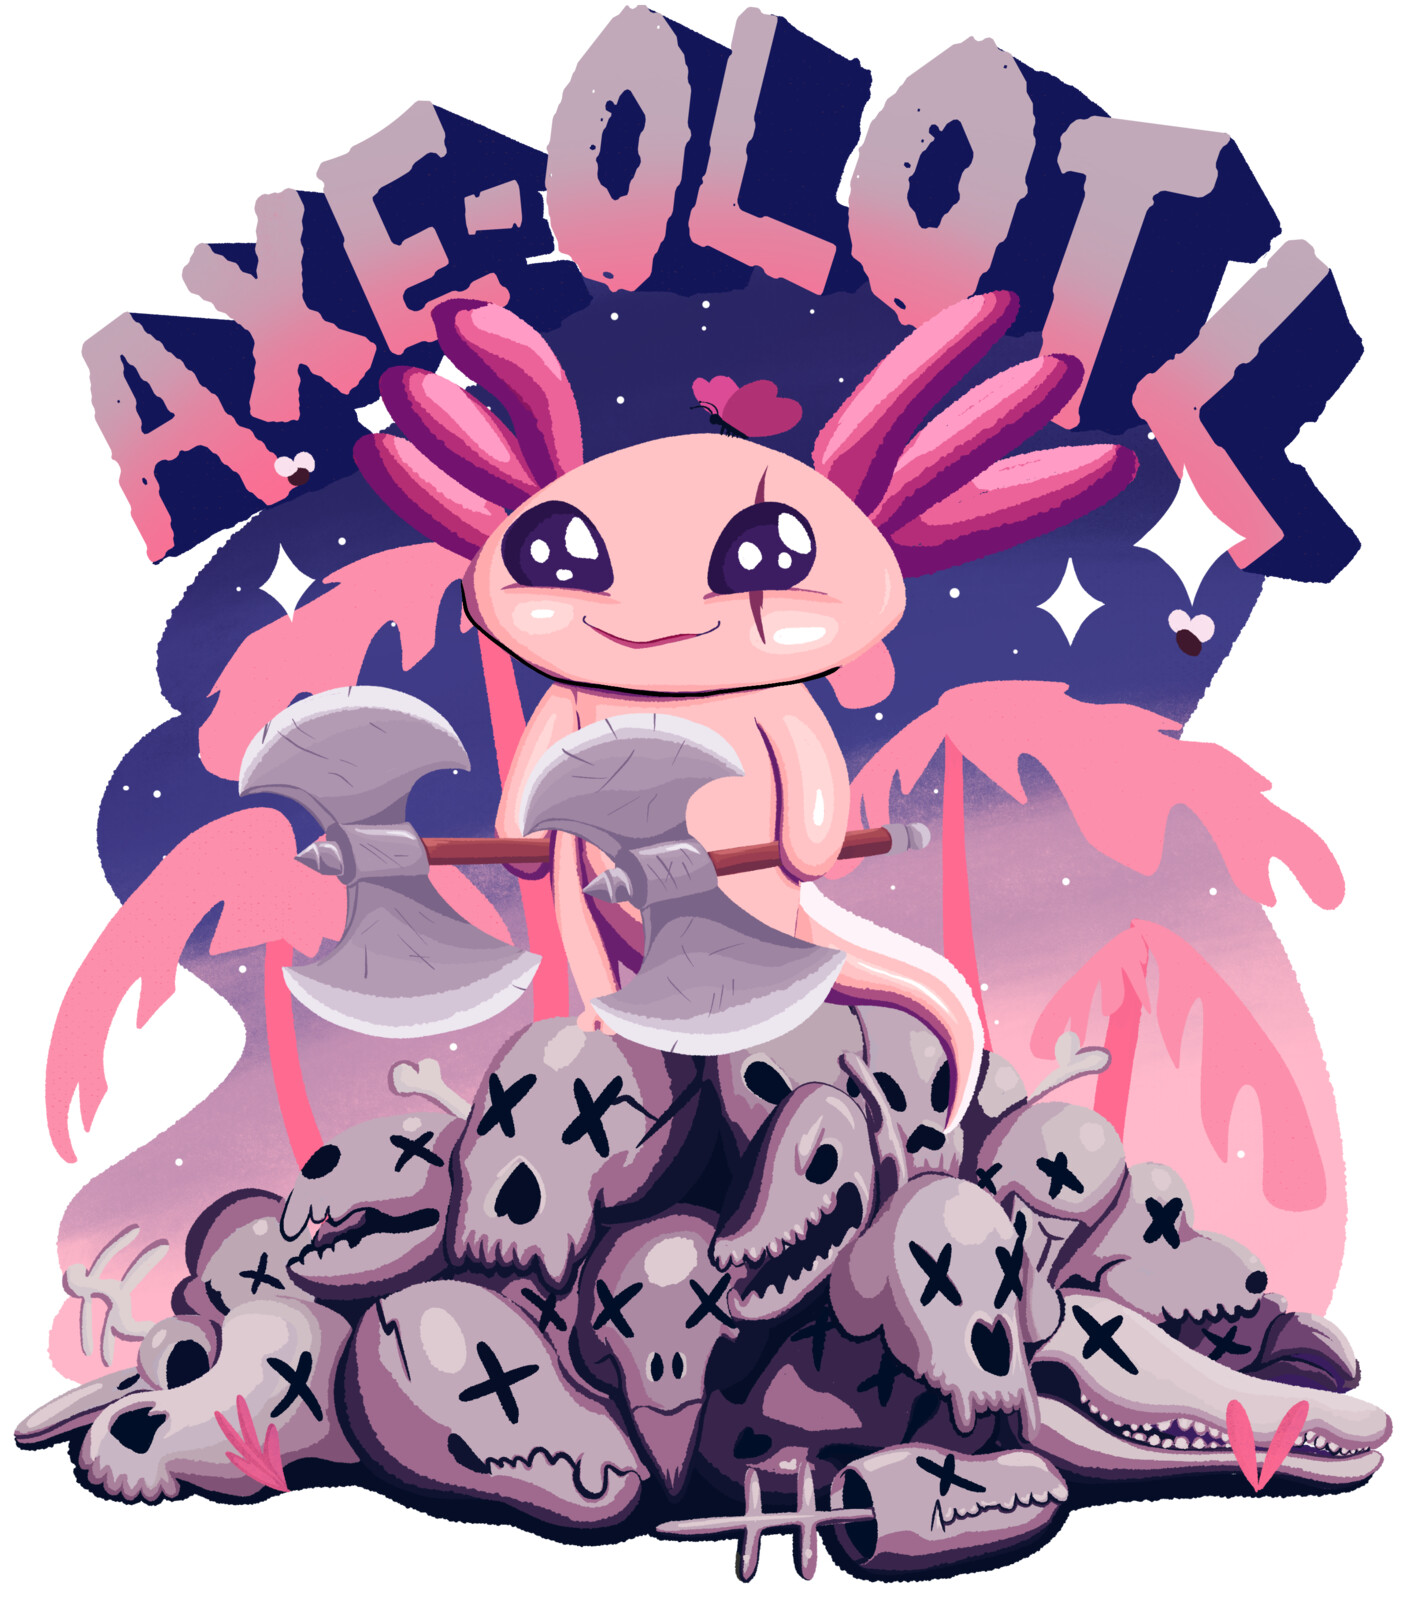 Axolotl animation and product design